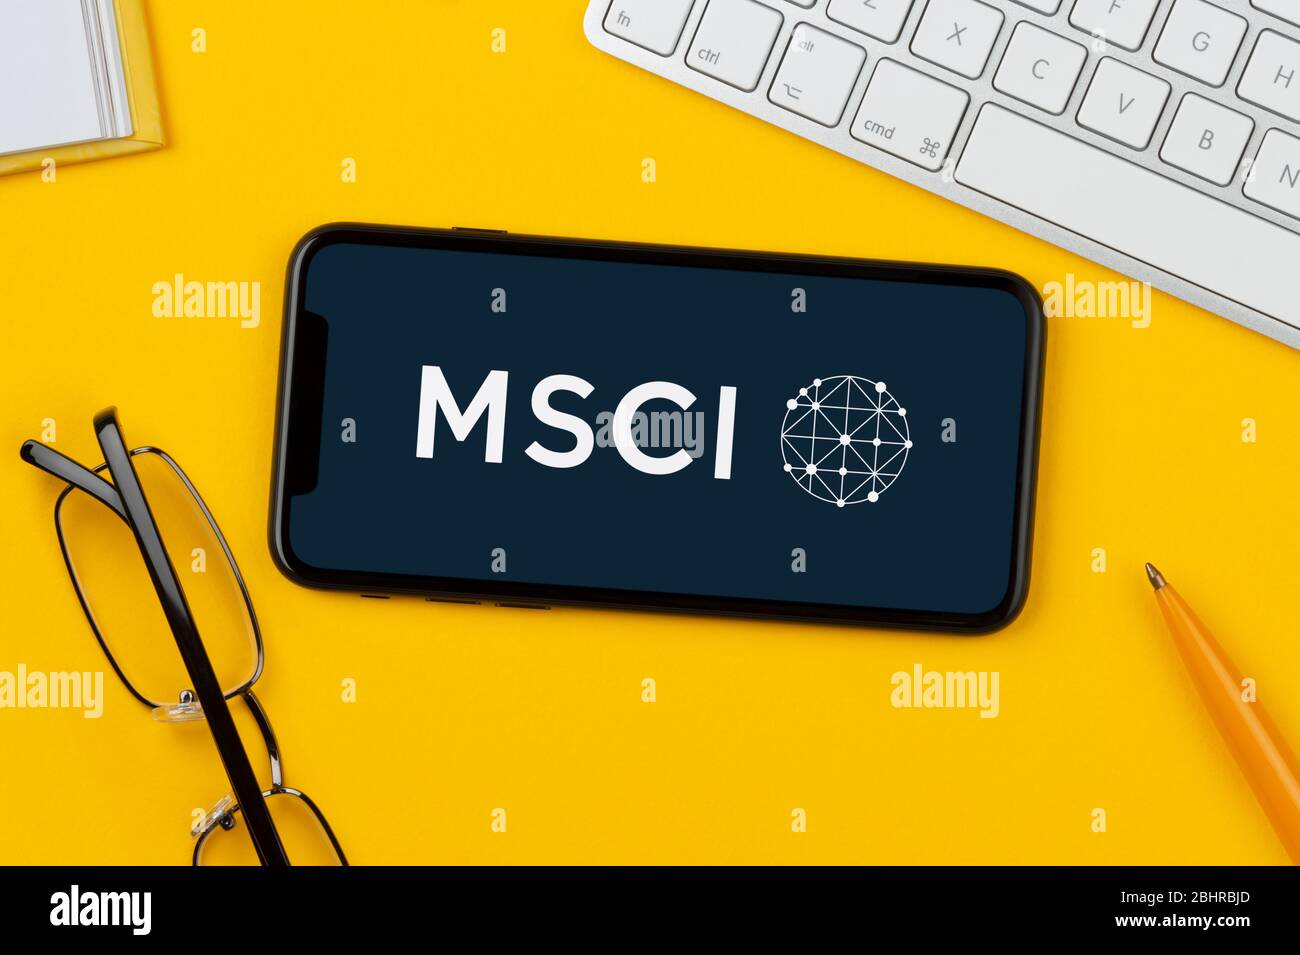 A smartphone showing the MSCI logo rests on a yellow background along with a keyboard, glasses, pen and book (Editorial use only). Stock Photo